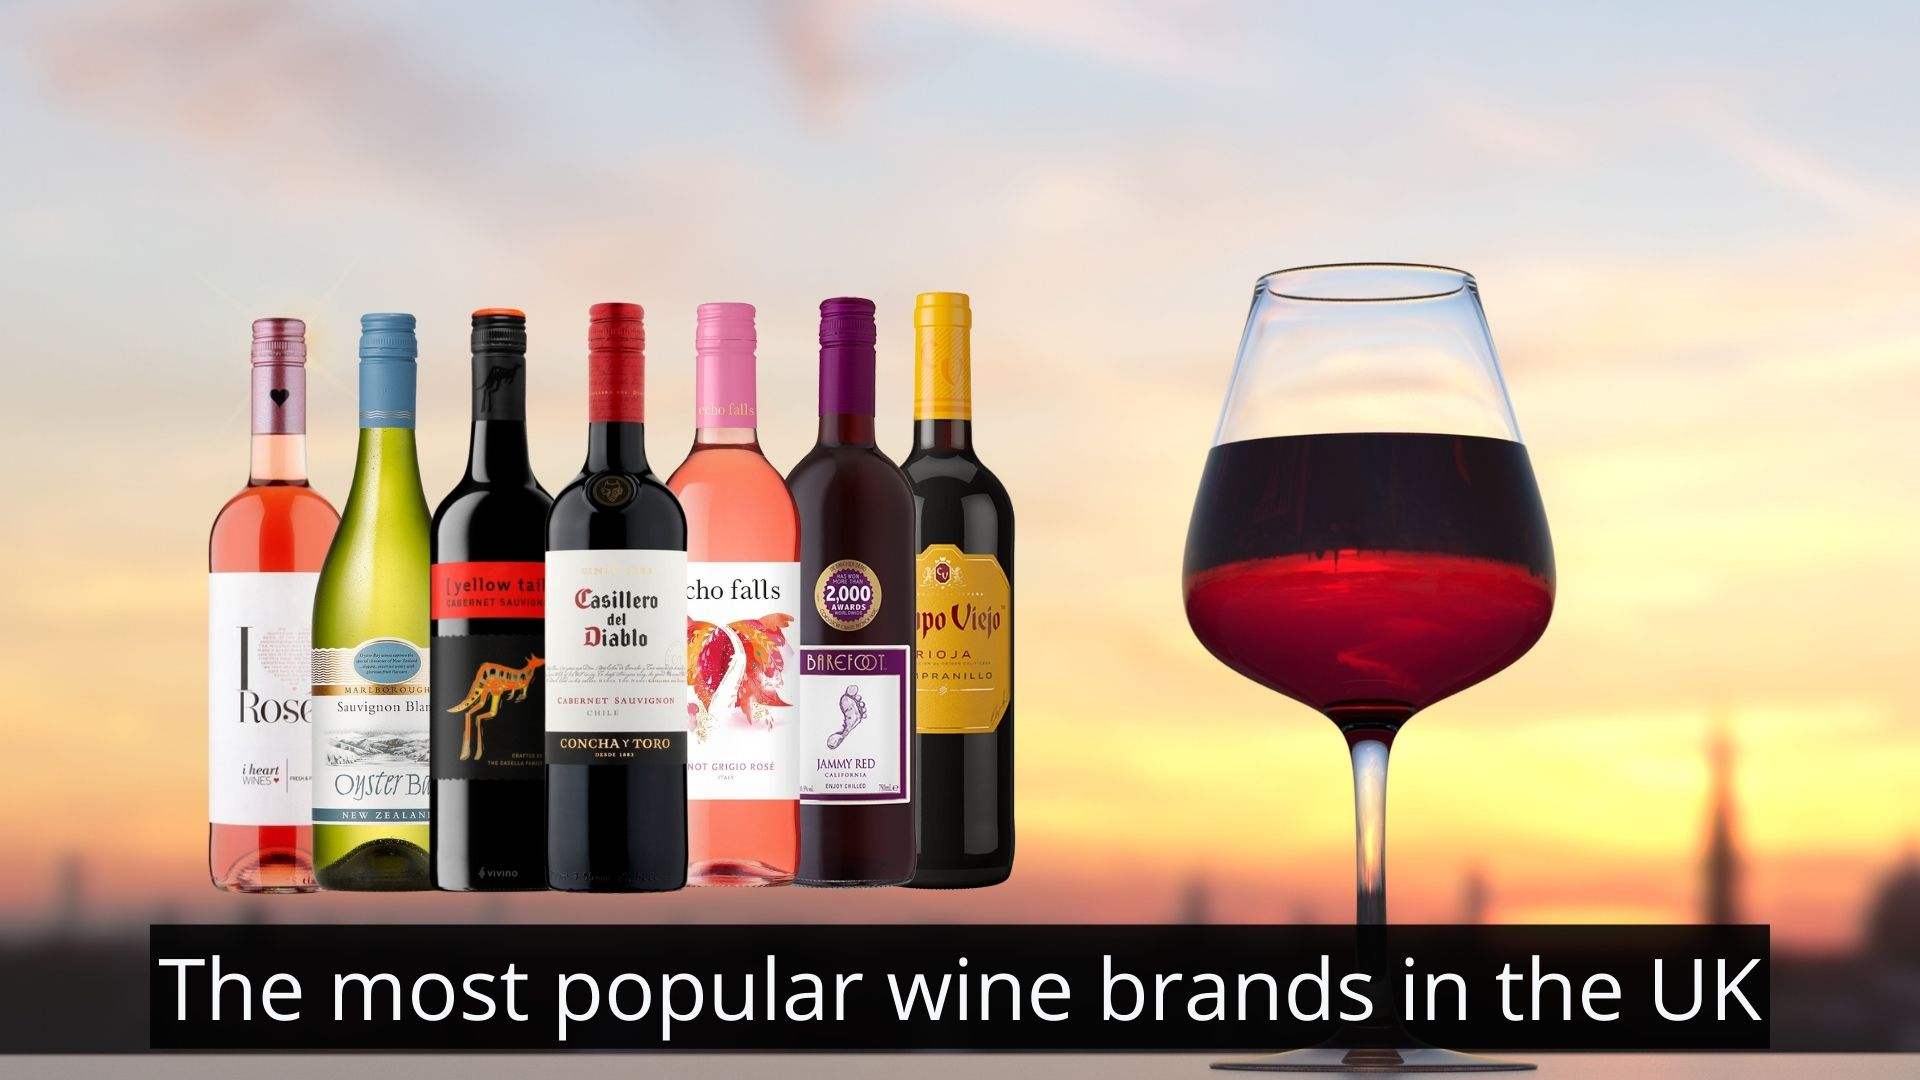 The most popular wine brands in the UK